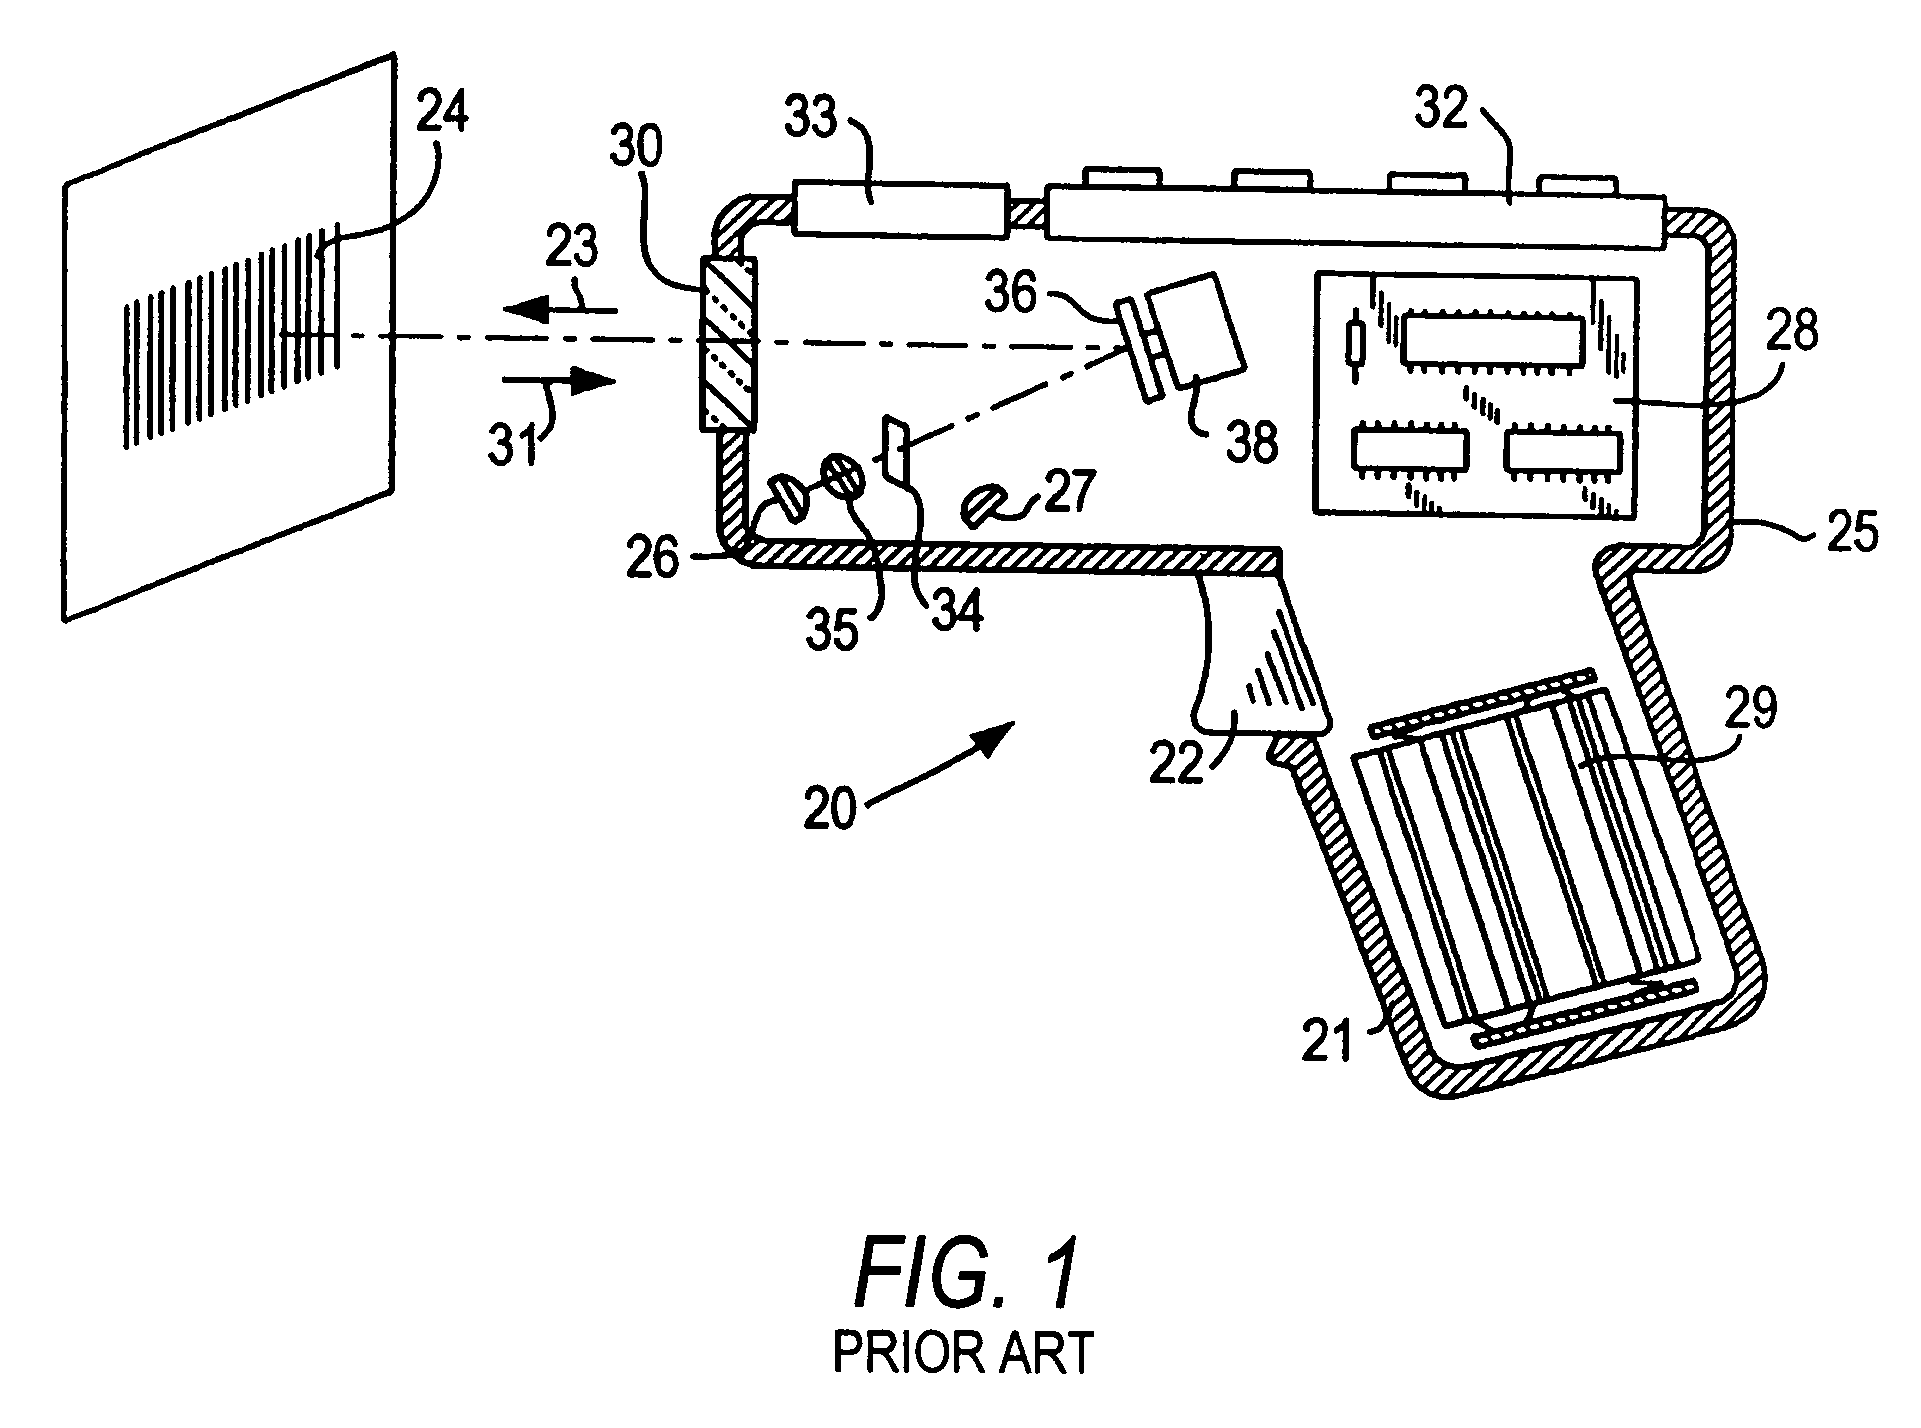 Optical adjustment of working range and beam spot size in electro-optical readers